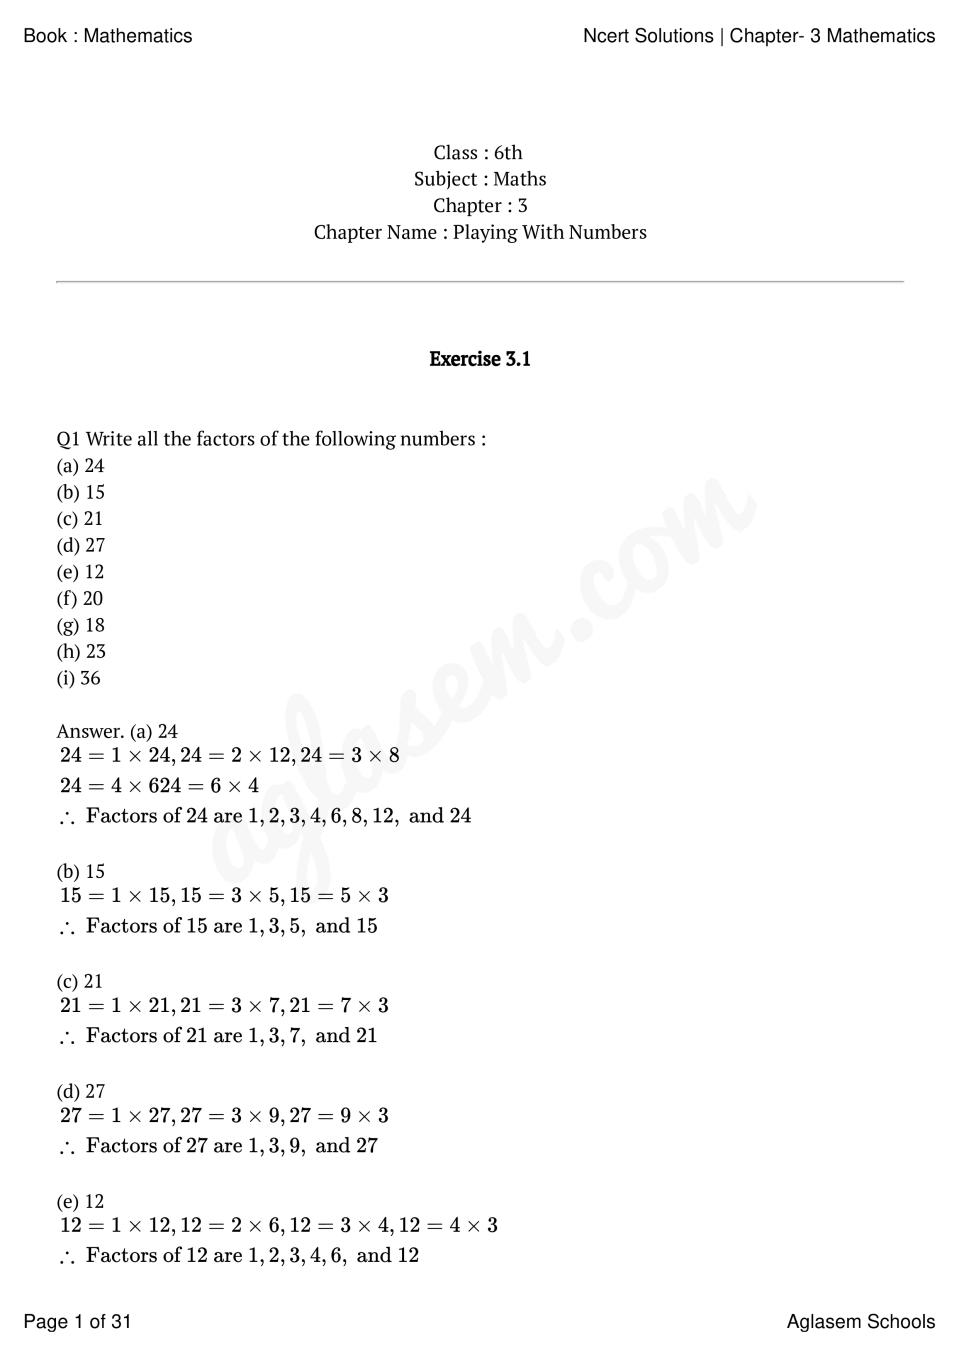 ncert-solutions-class-6-mathematics-chapter-3-playing-with-numbers-aglasem-schools